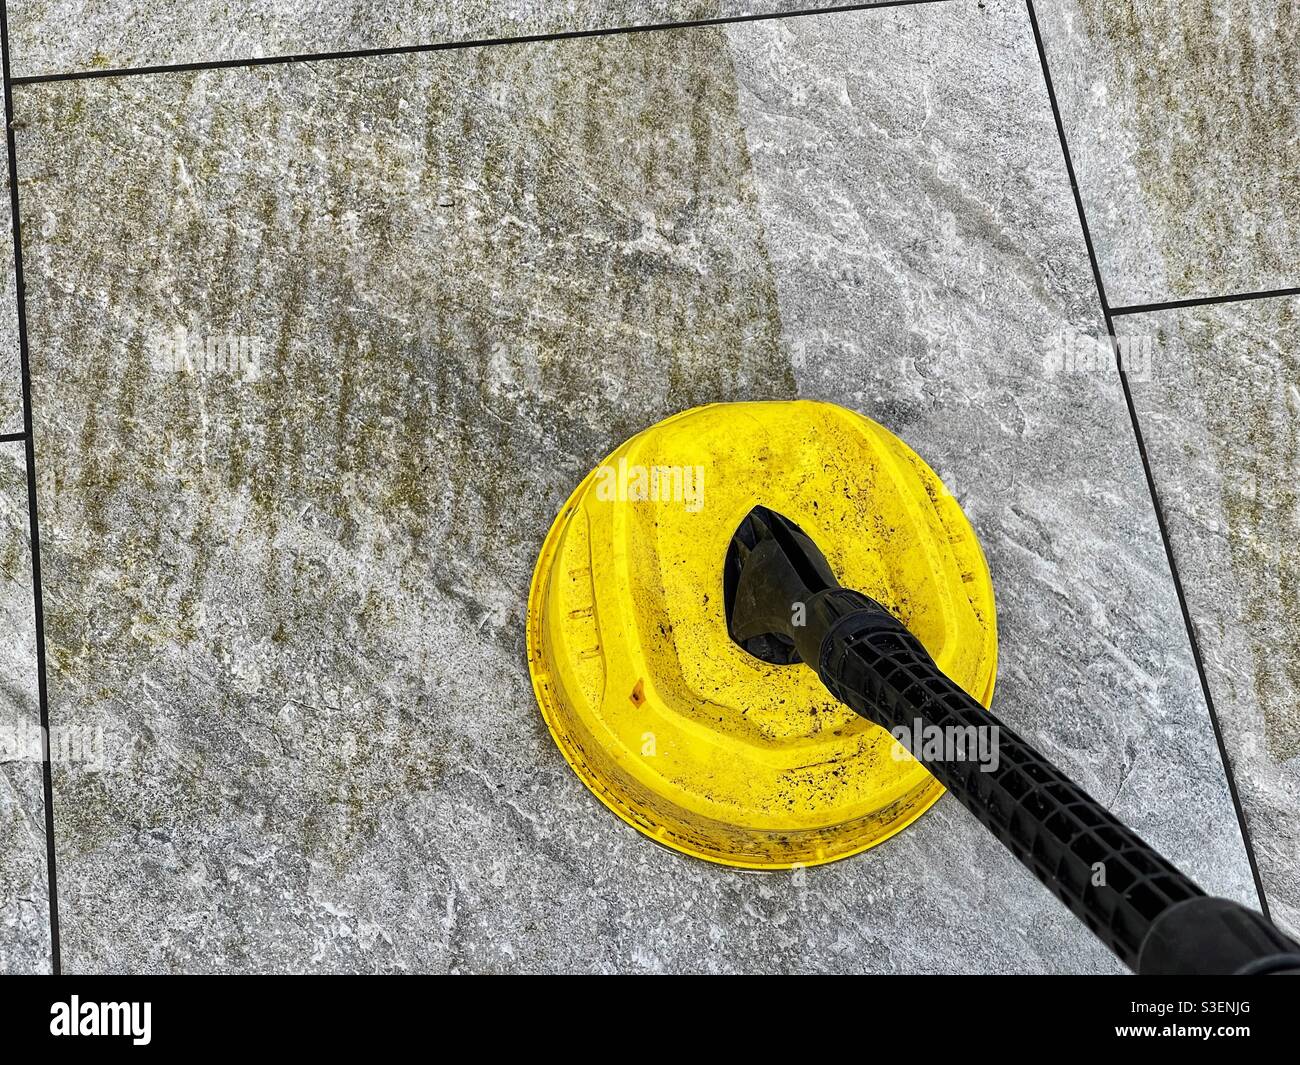 Attachment on a pressure washer being used to clean porcelain paving slabs on a garden patio, with contrast between clean and dirty areas Stock Photo